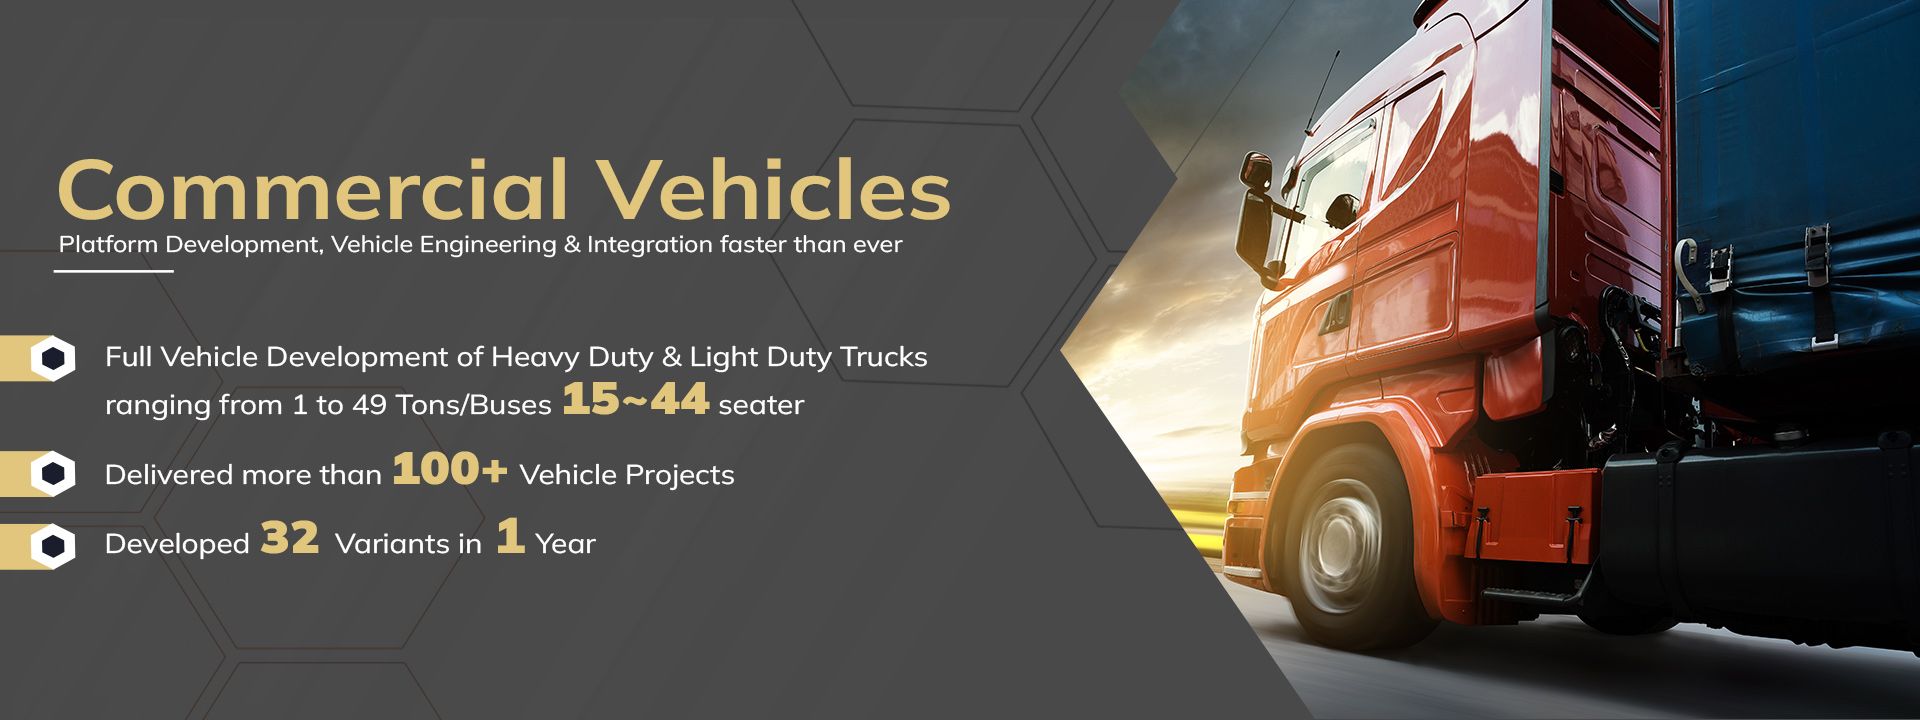 Hinduja Tech_Product Development Services_Commercial Vehicles_Banner